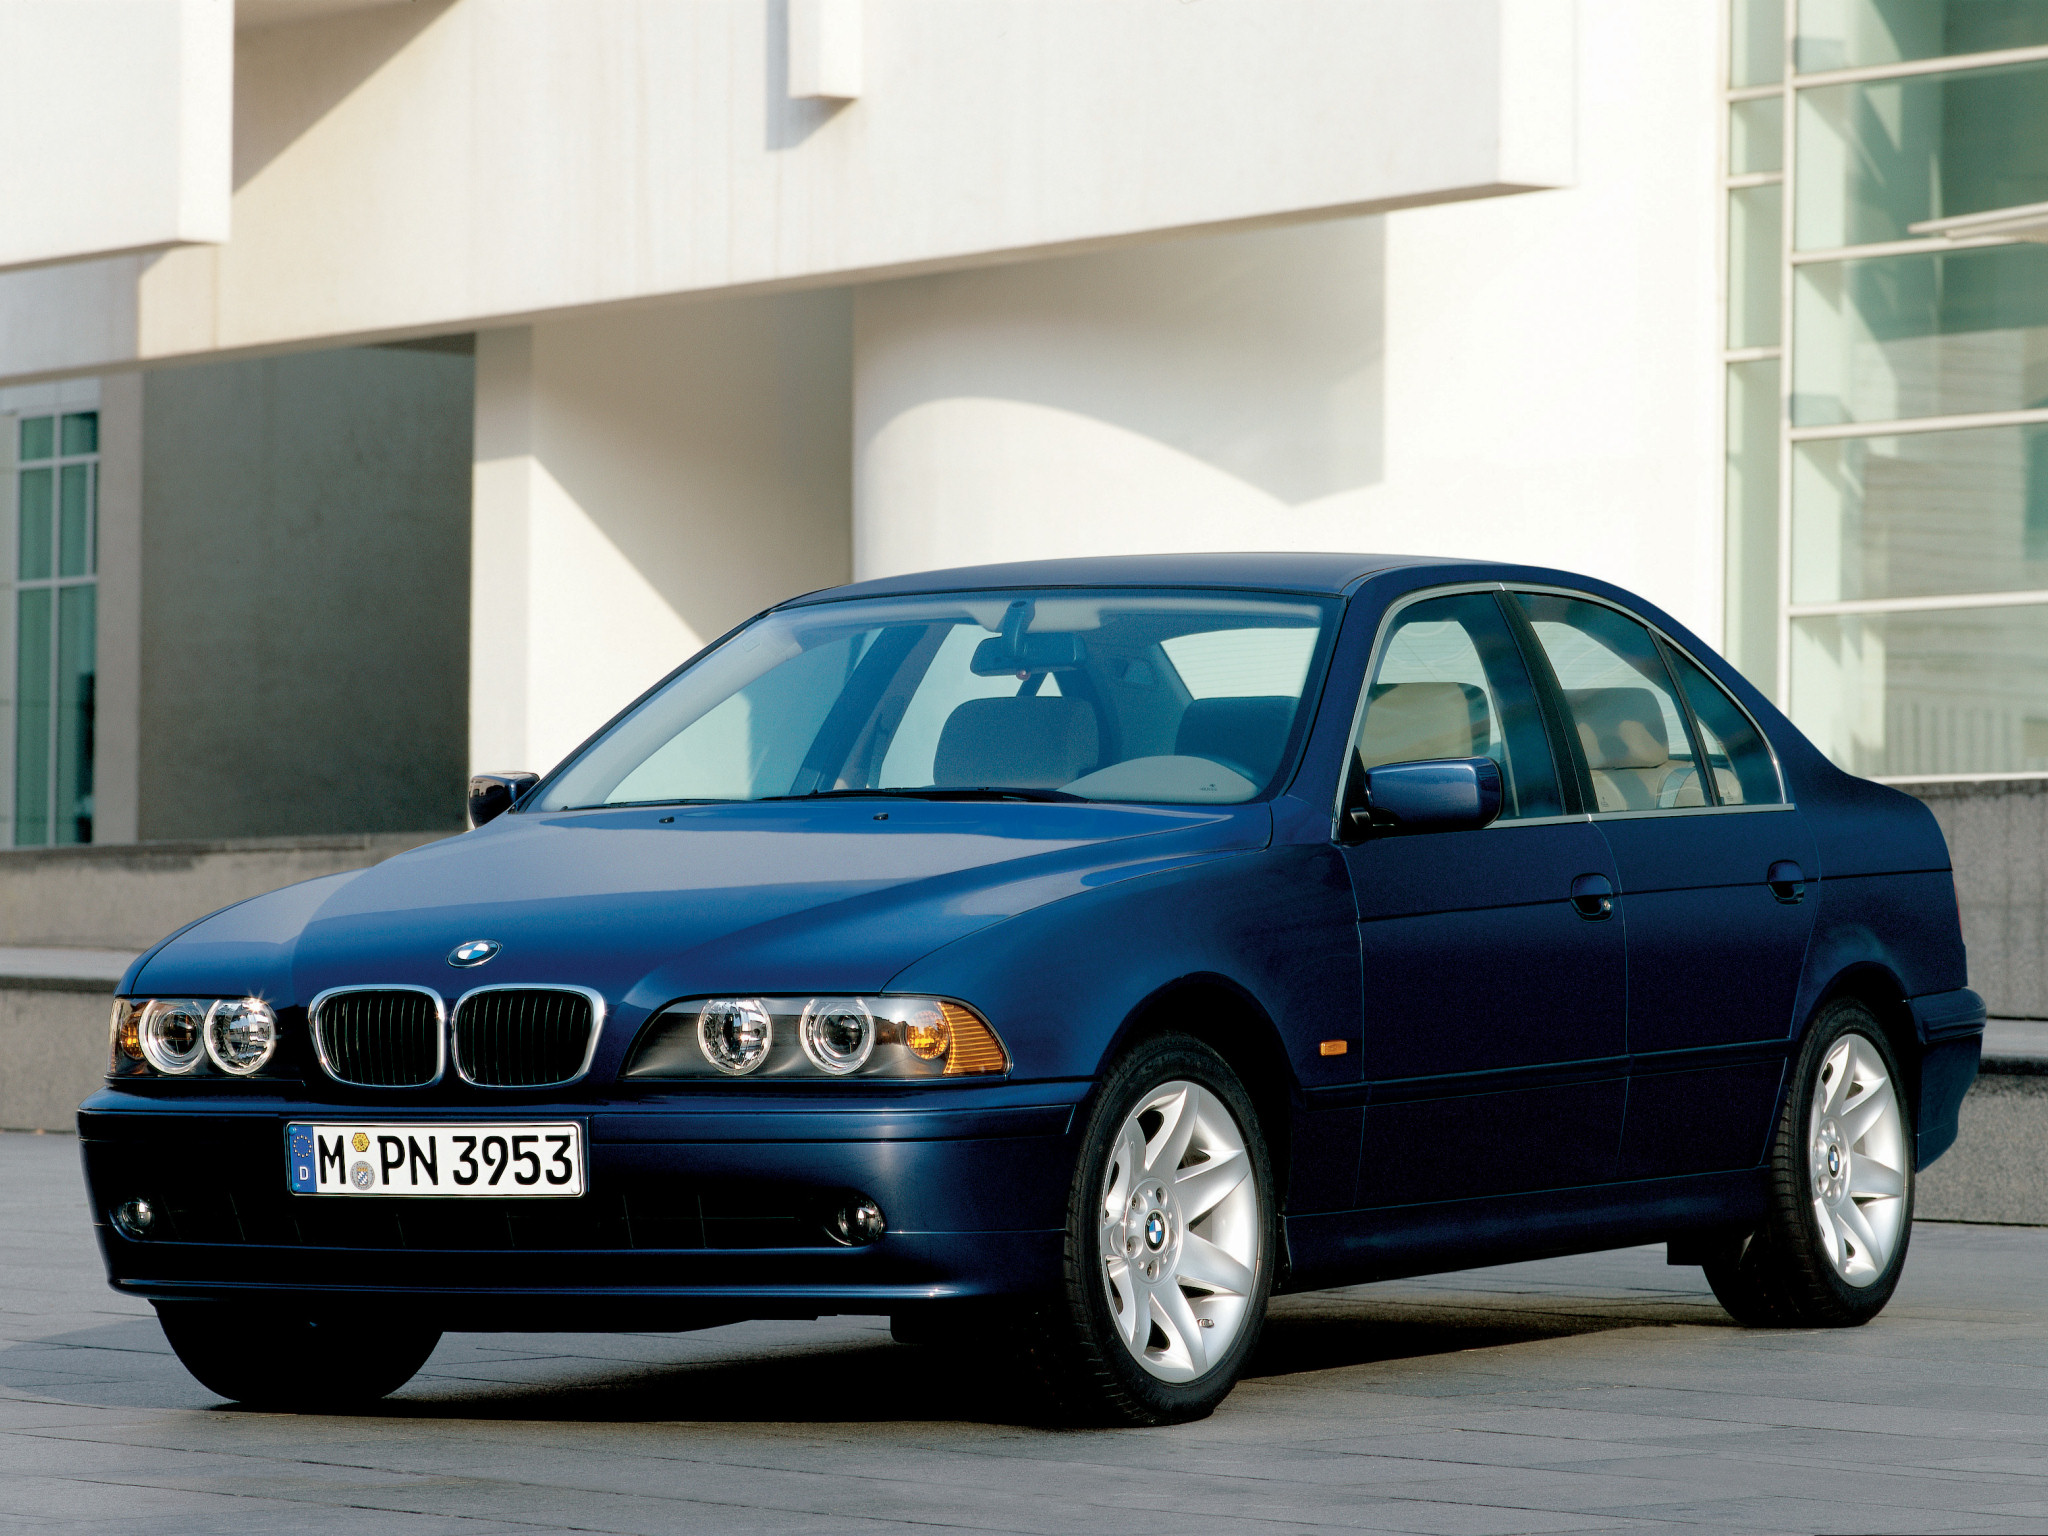 Car in pictures – car photo gallery » BMW 5-Series 525i Sedan E39 2000